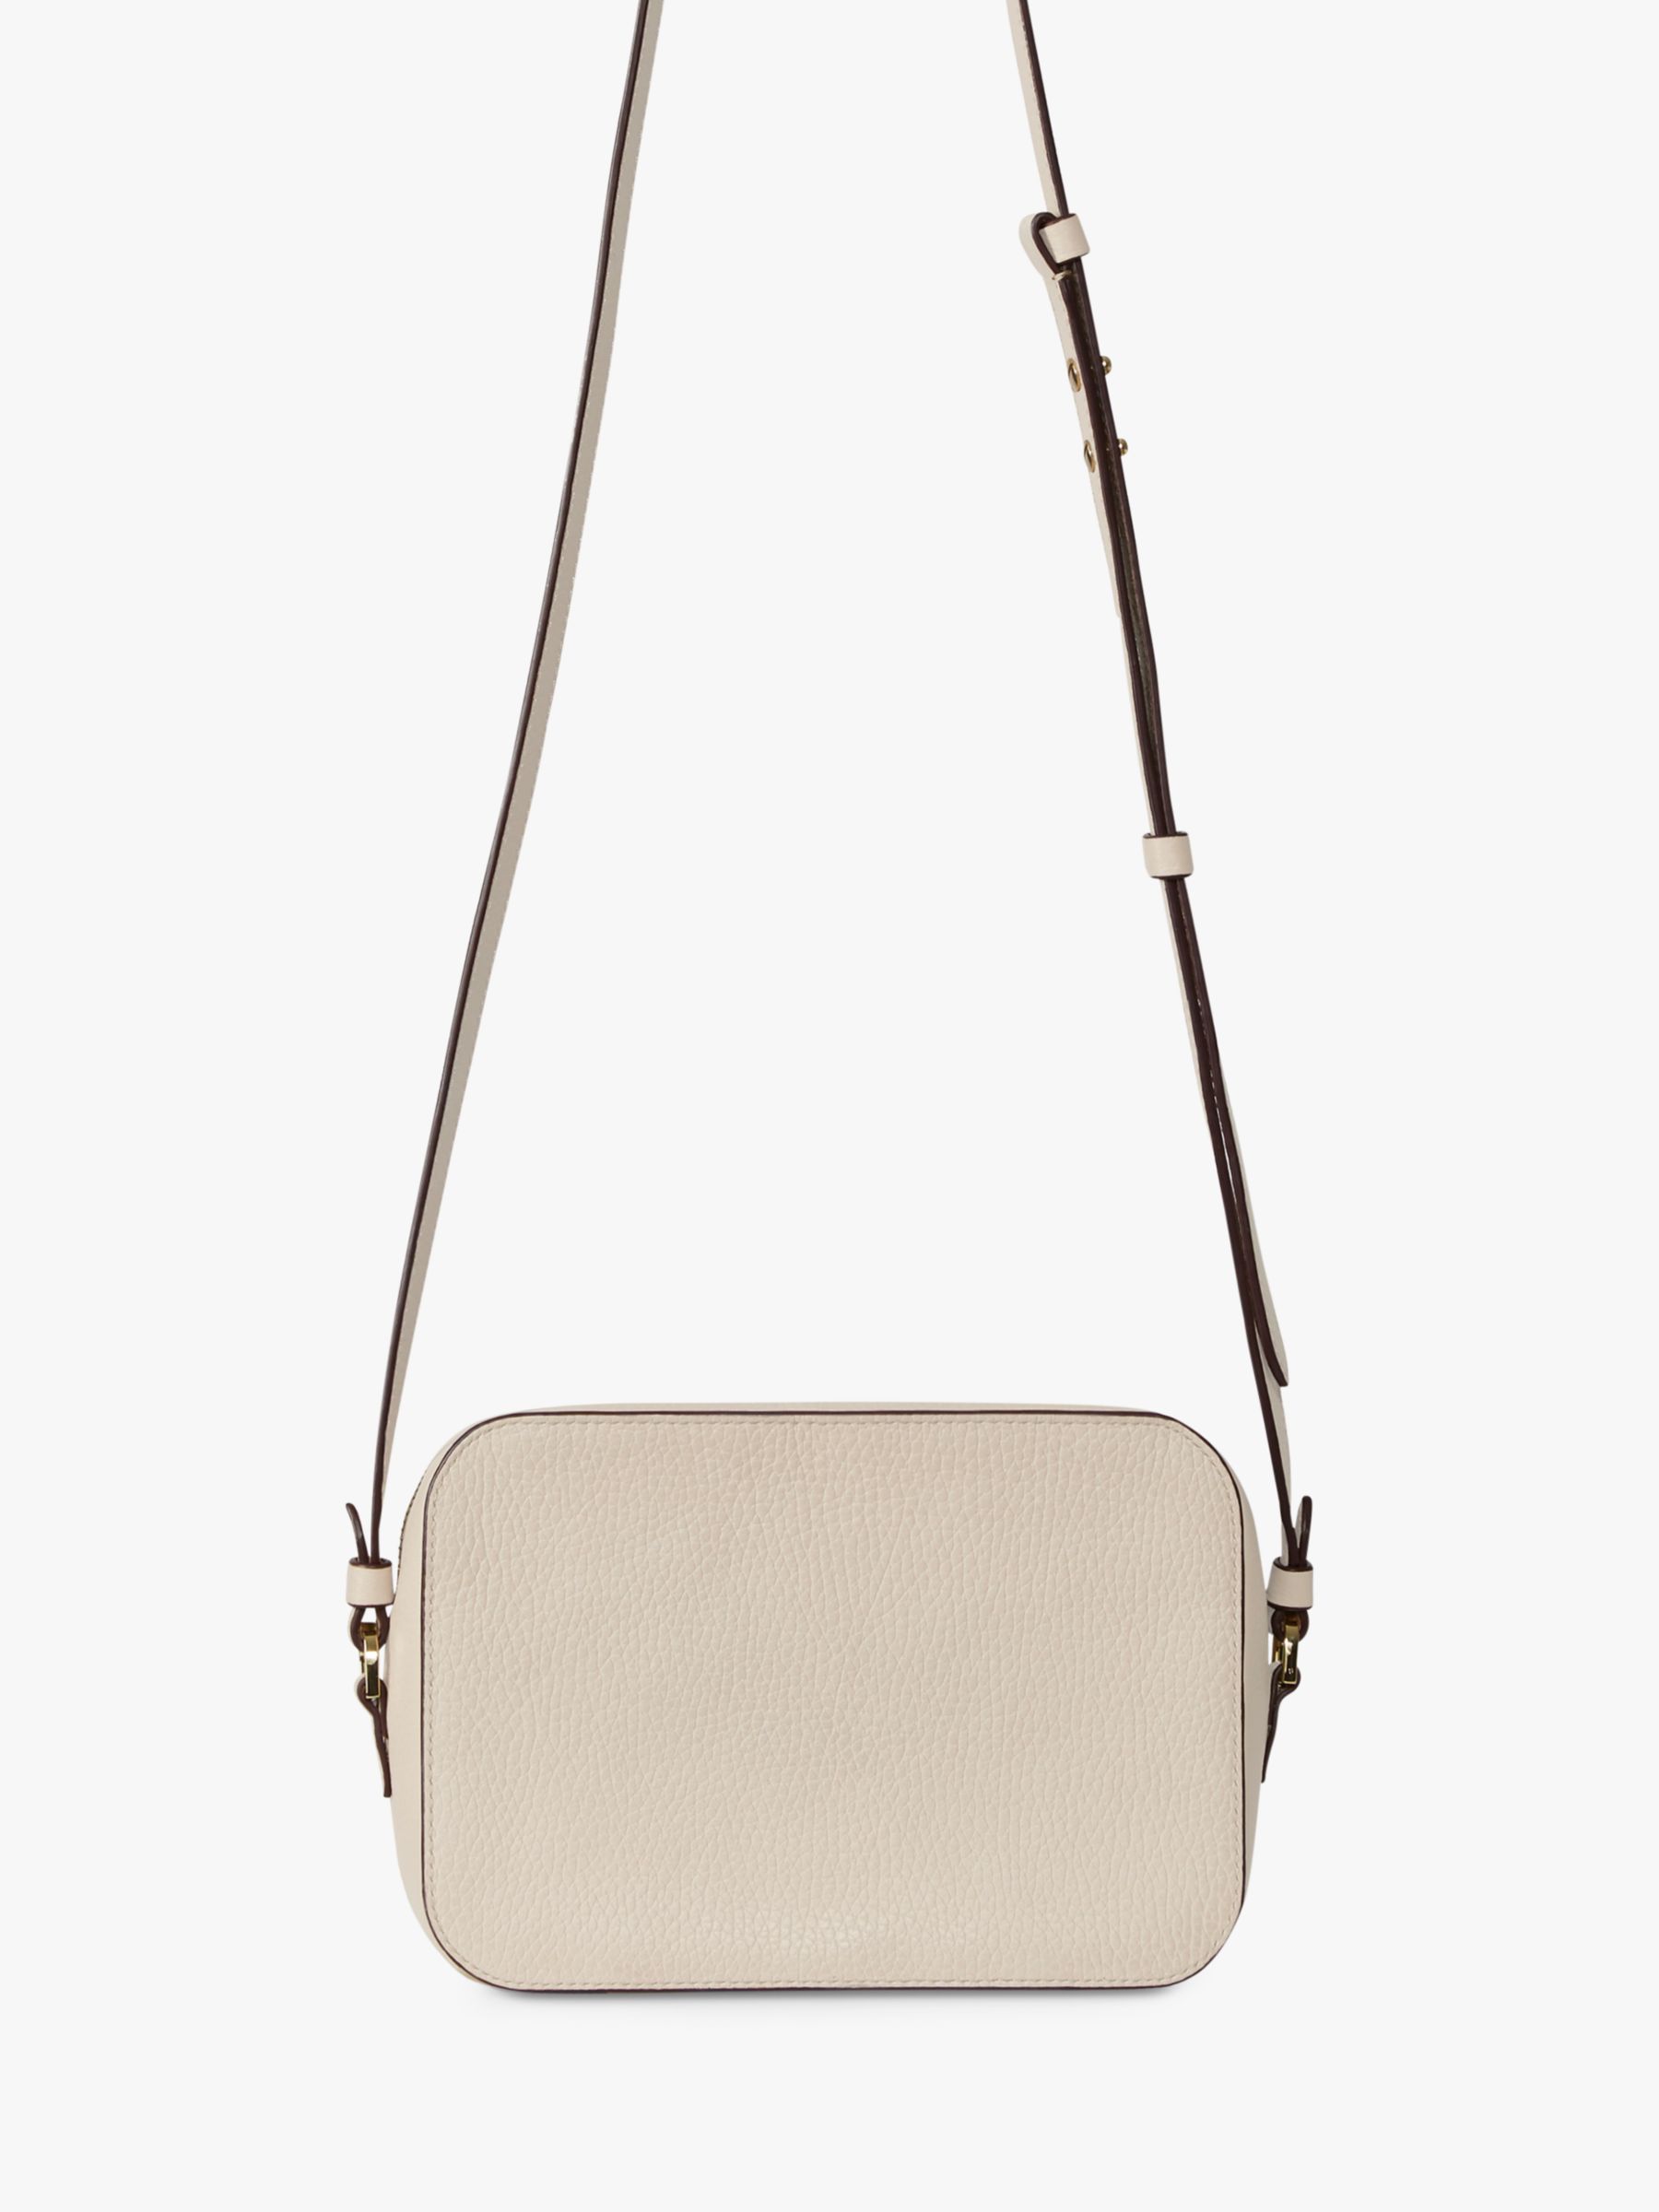 Strathberry Mosaic Bag, Oat at John Lewis & Partners